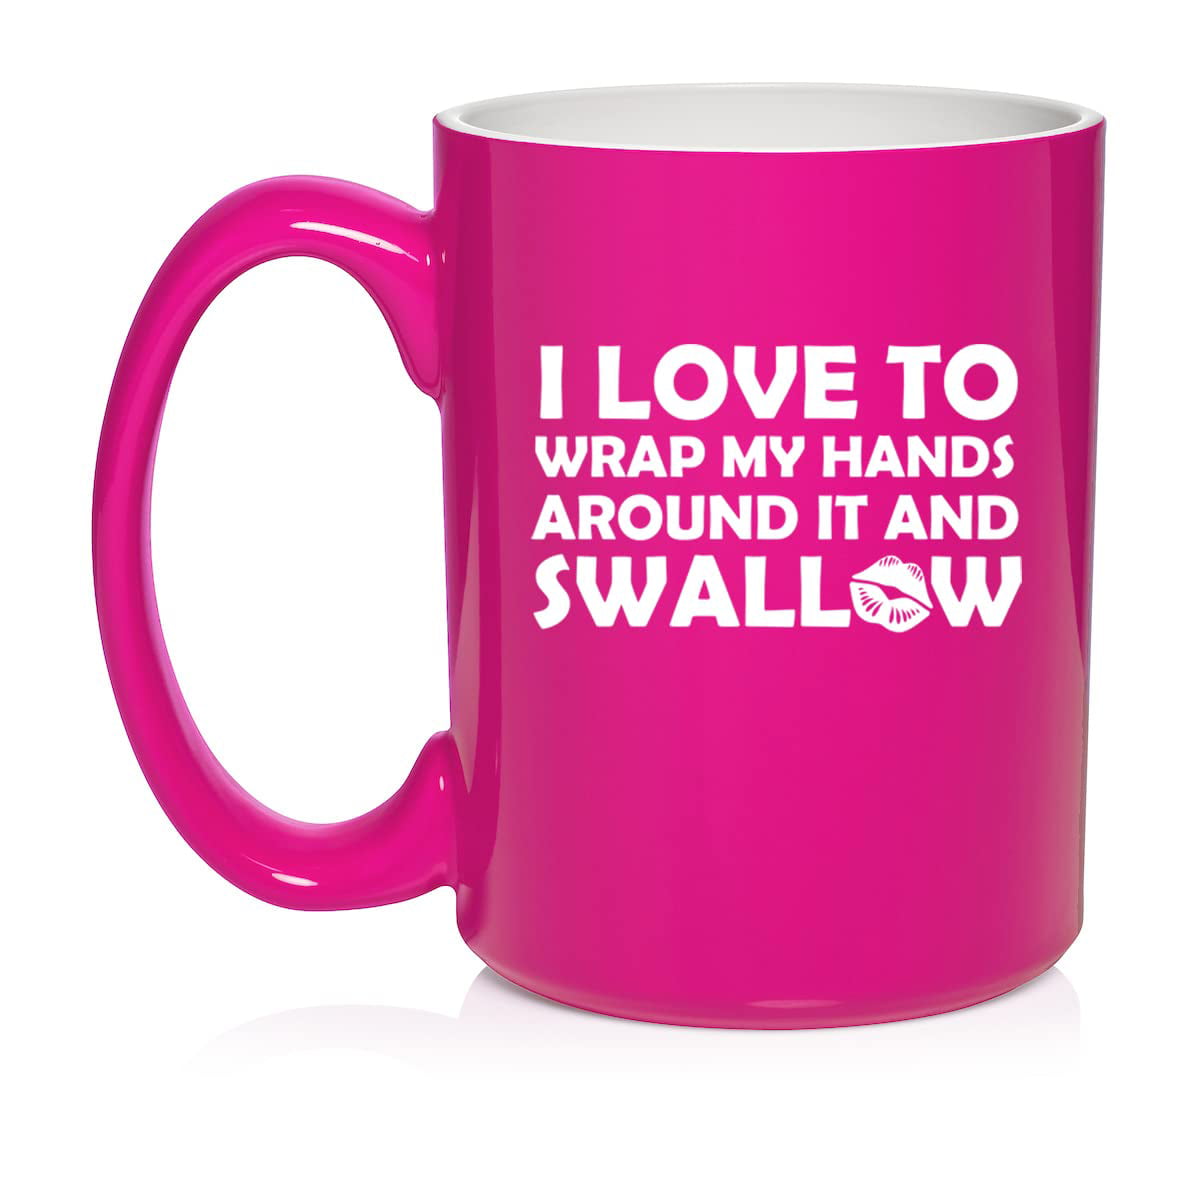 ajeet dev recommends I Love To Swallow